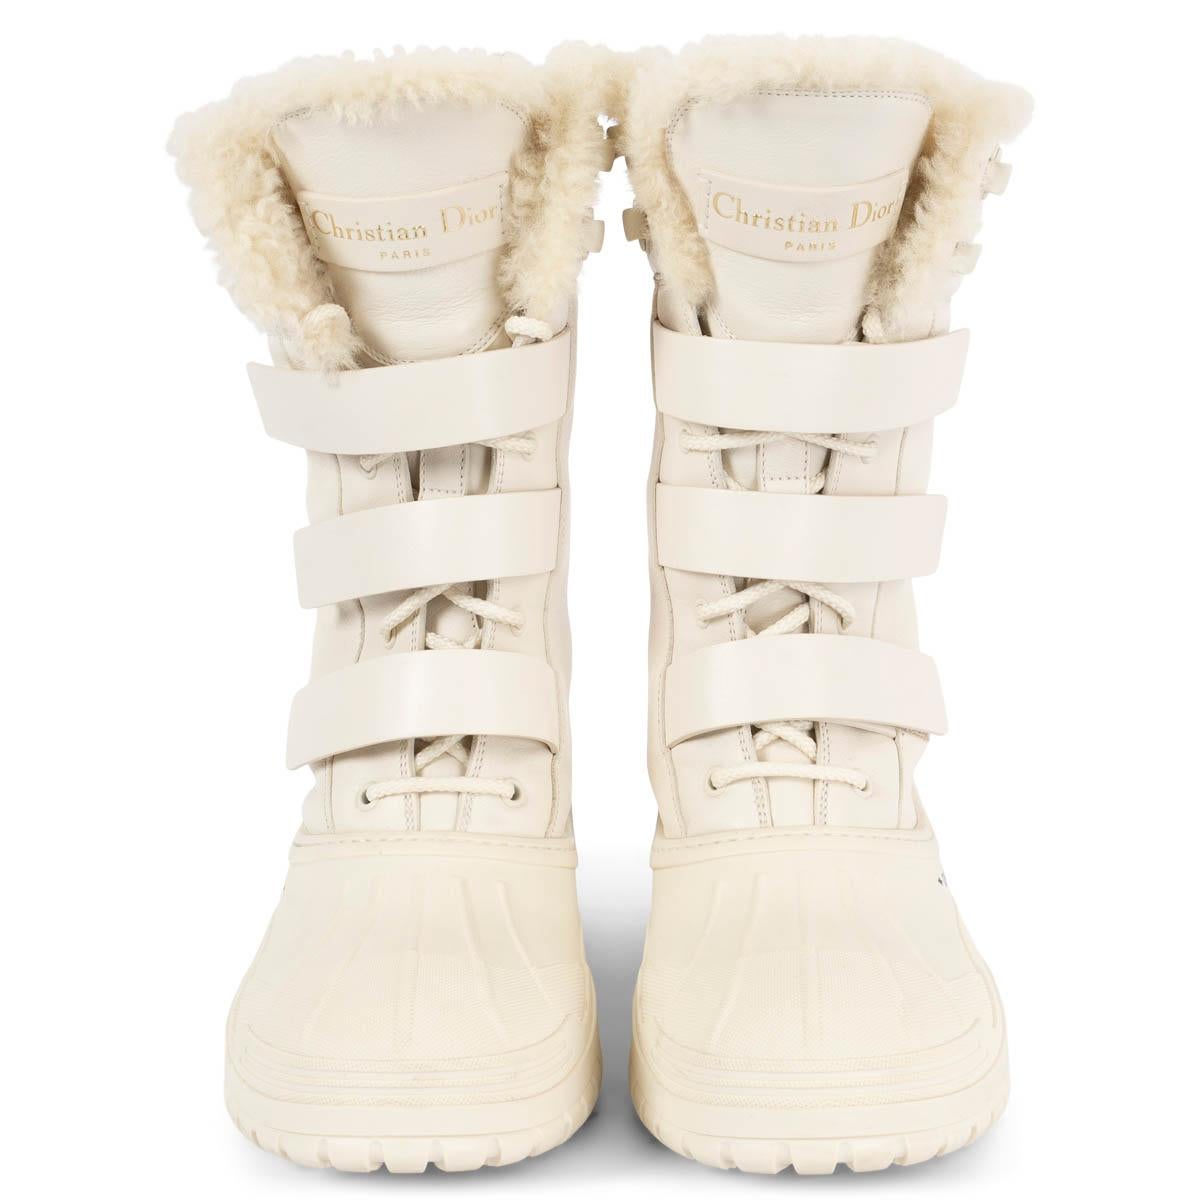 100% authentic Christian Dior D-Venture lace-up combat snow boots in ivory leather and rubber with velcro closure. Fully lined in shearling. Have been worn once and are in virtually new condition. 

Measurements
Imprinted Size	39.5
Shoe